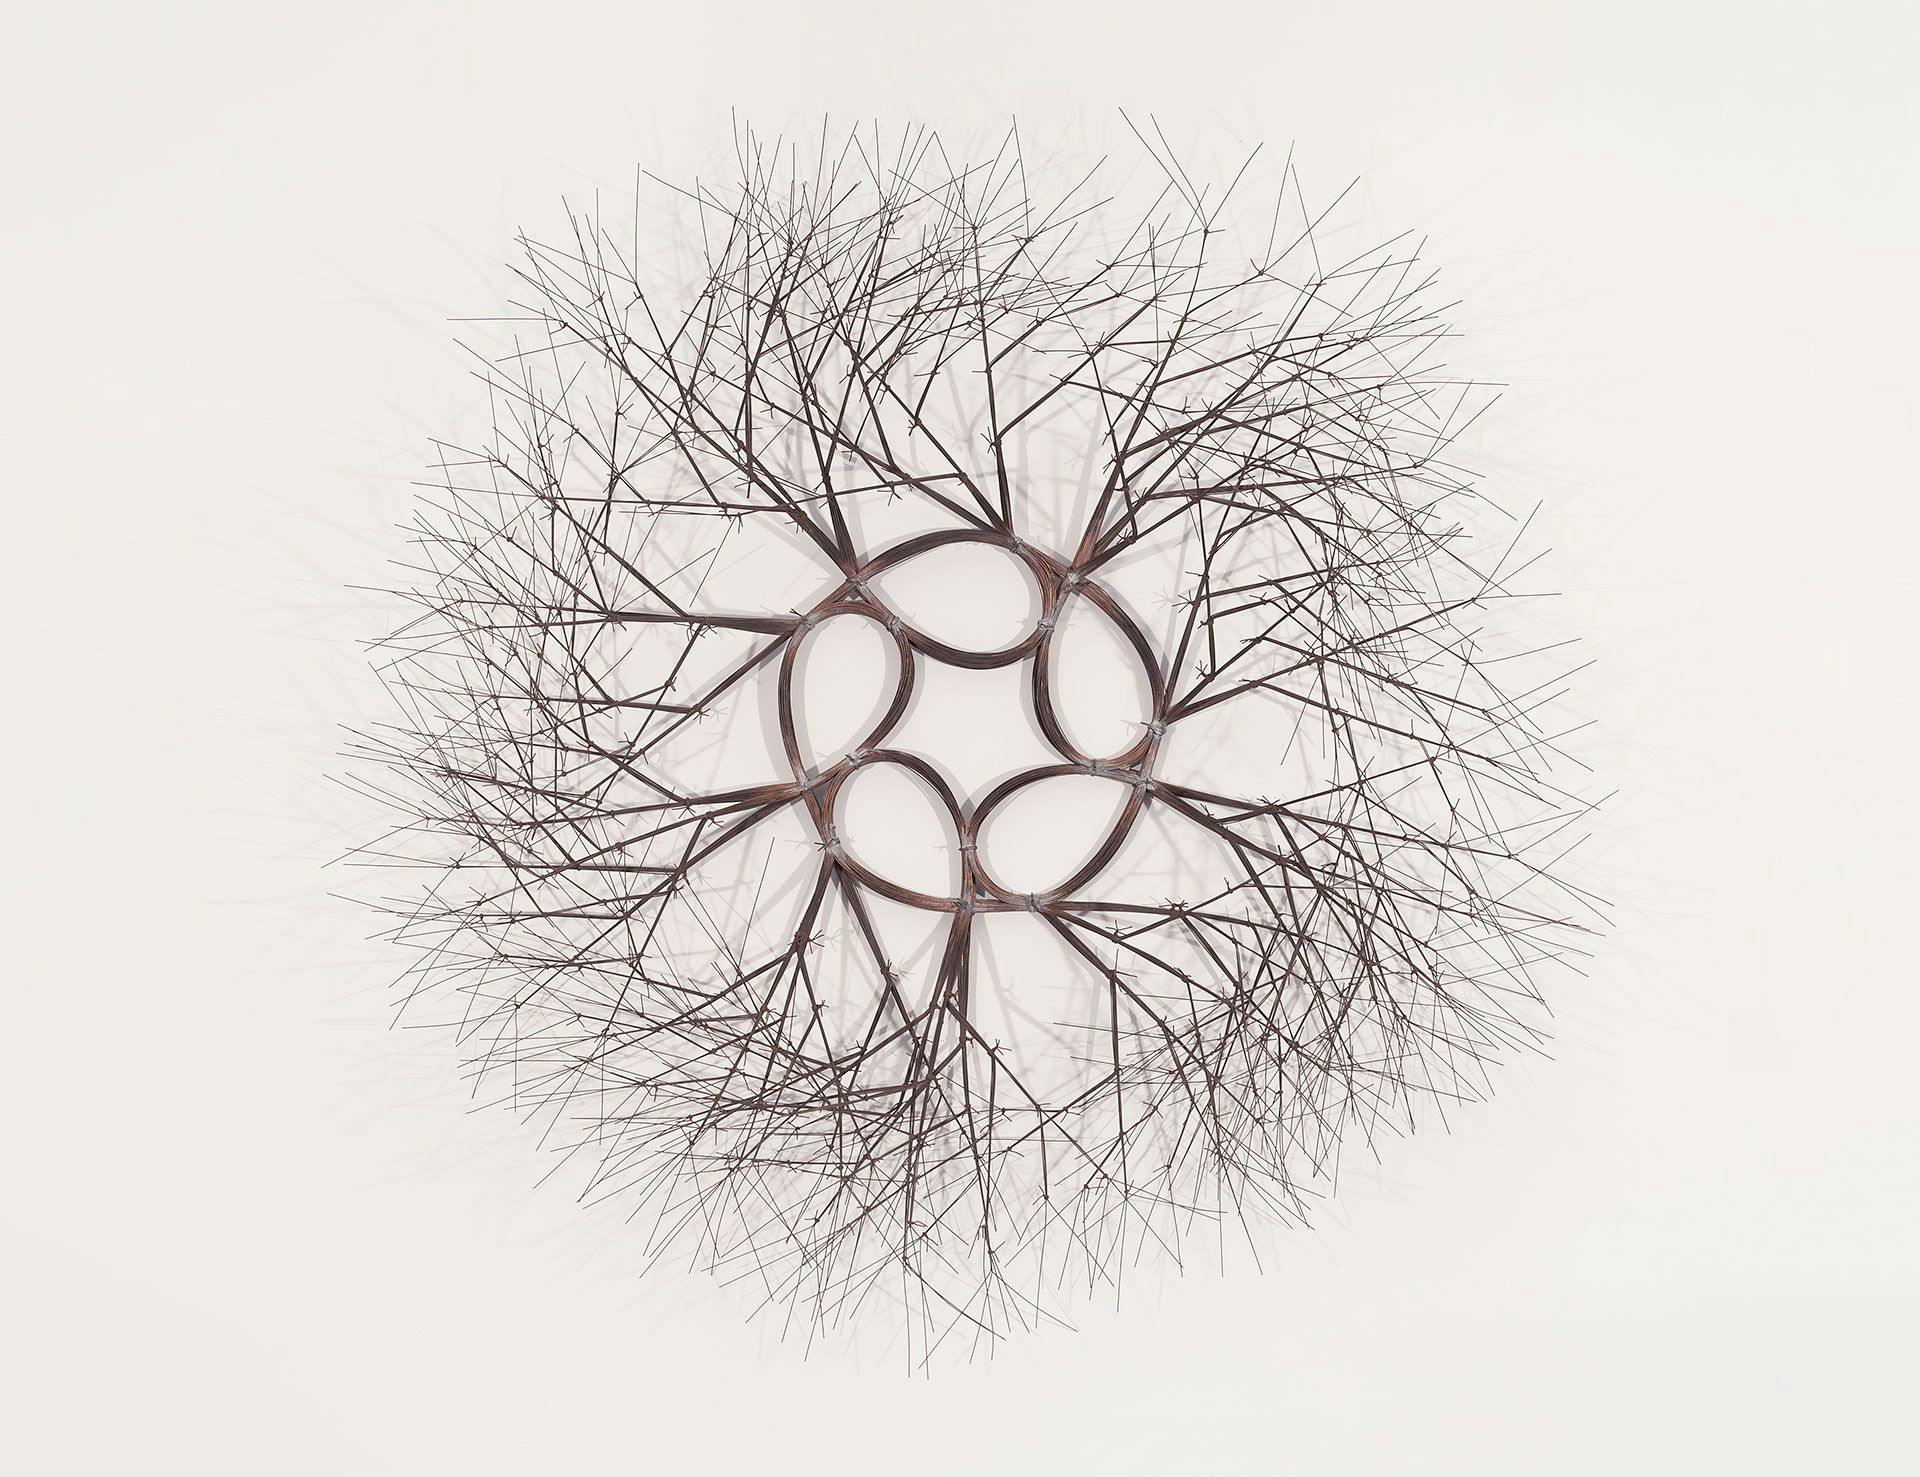 A wall-hanging wire sculpture by Ruth Asawa, titled Sun and Star (S.616/60), circa 1966.